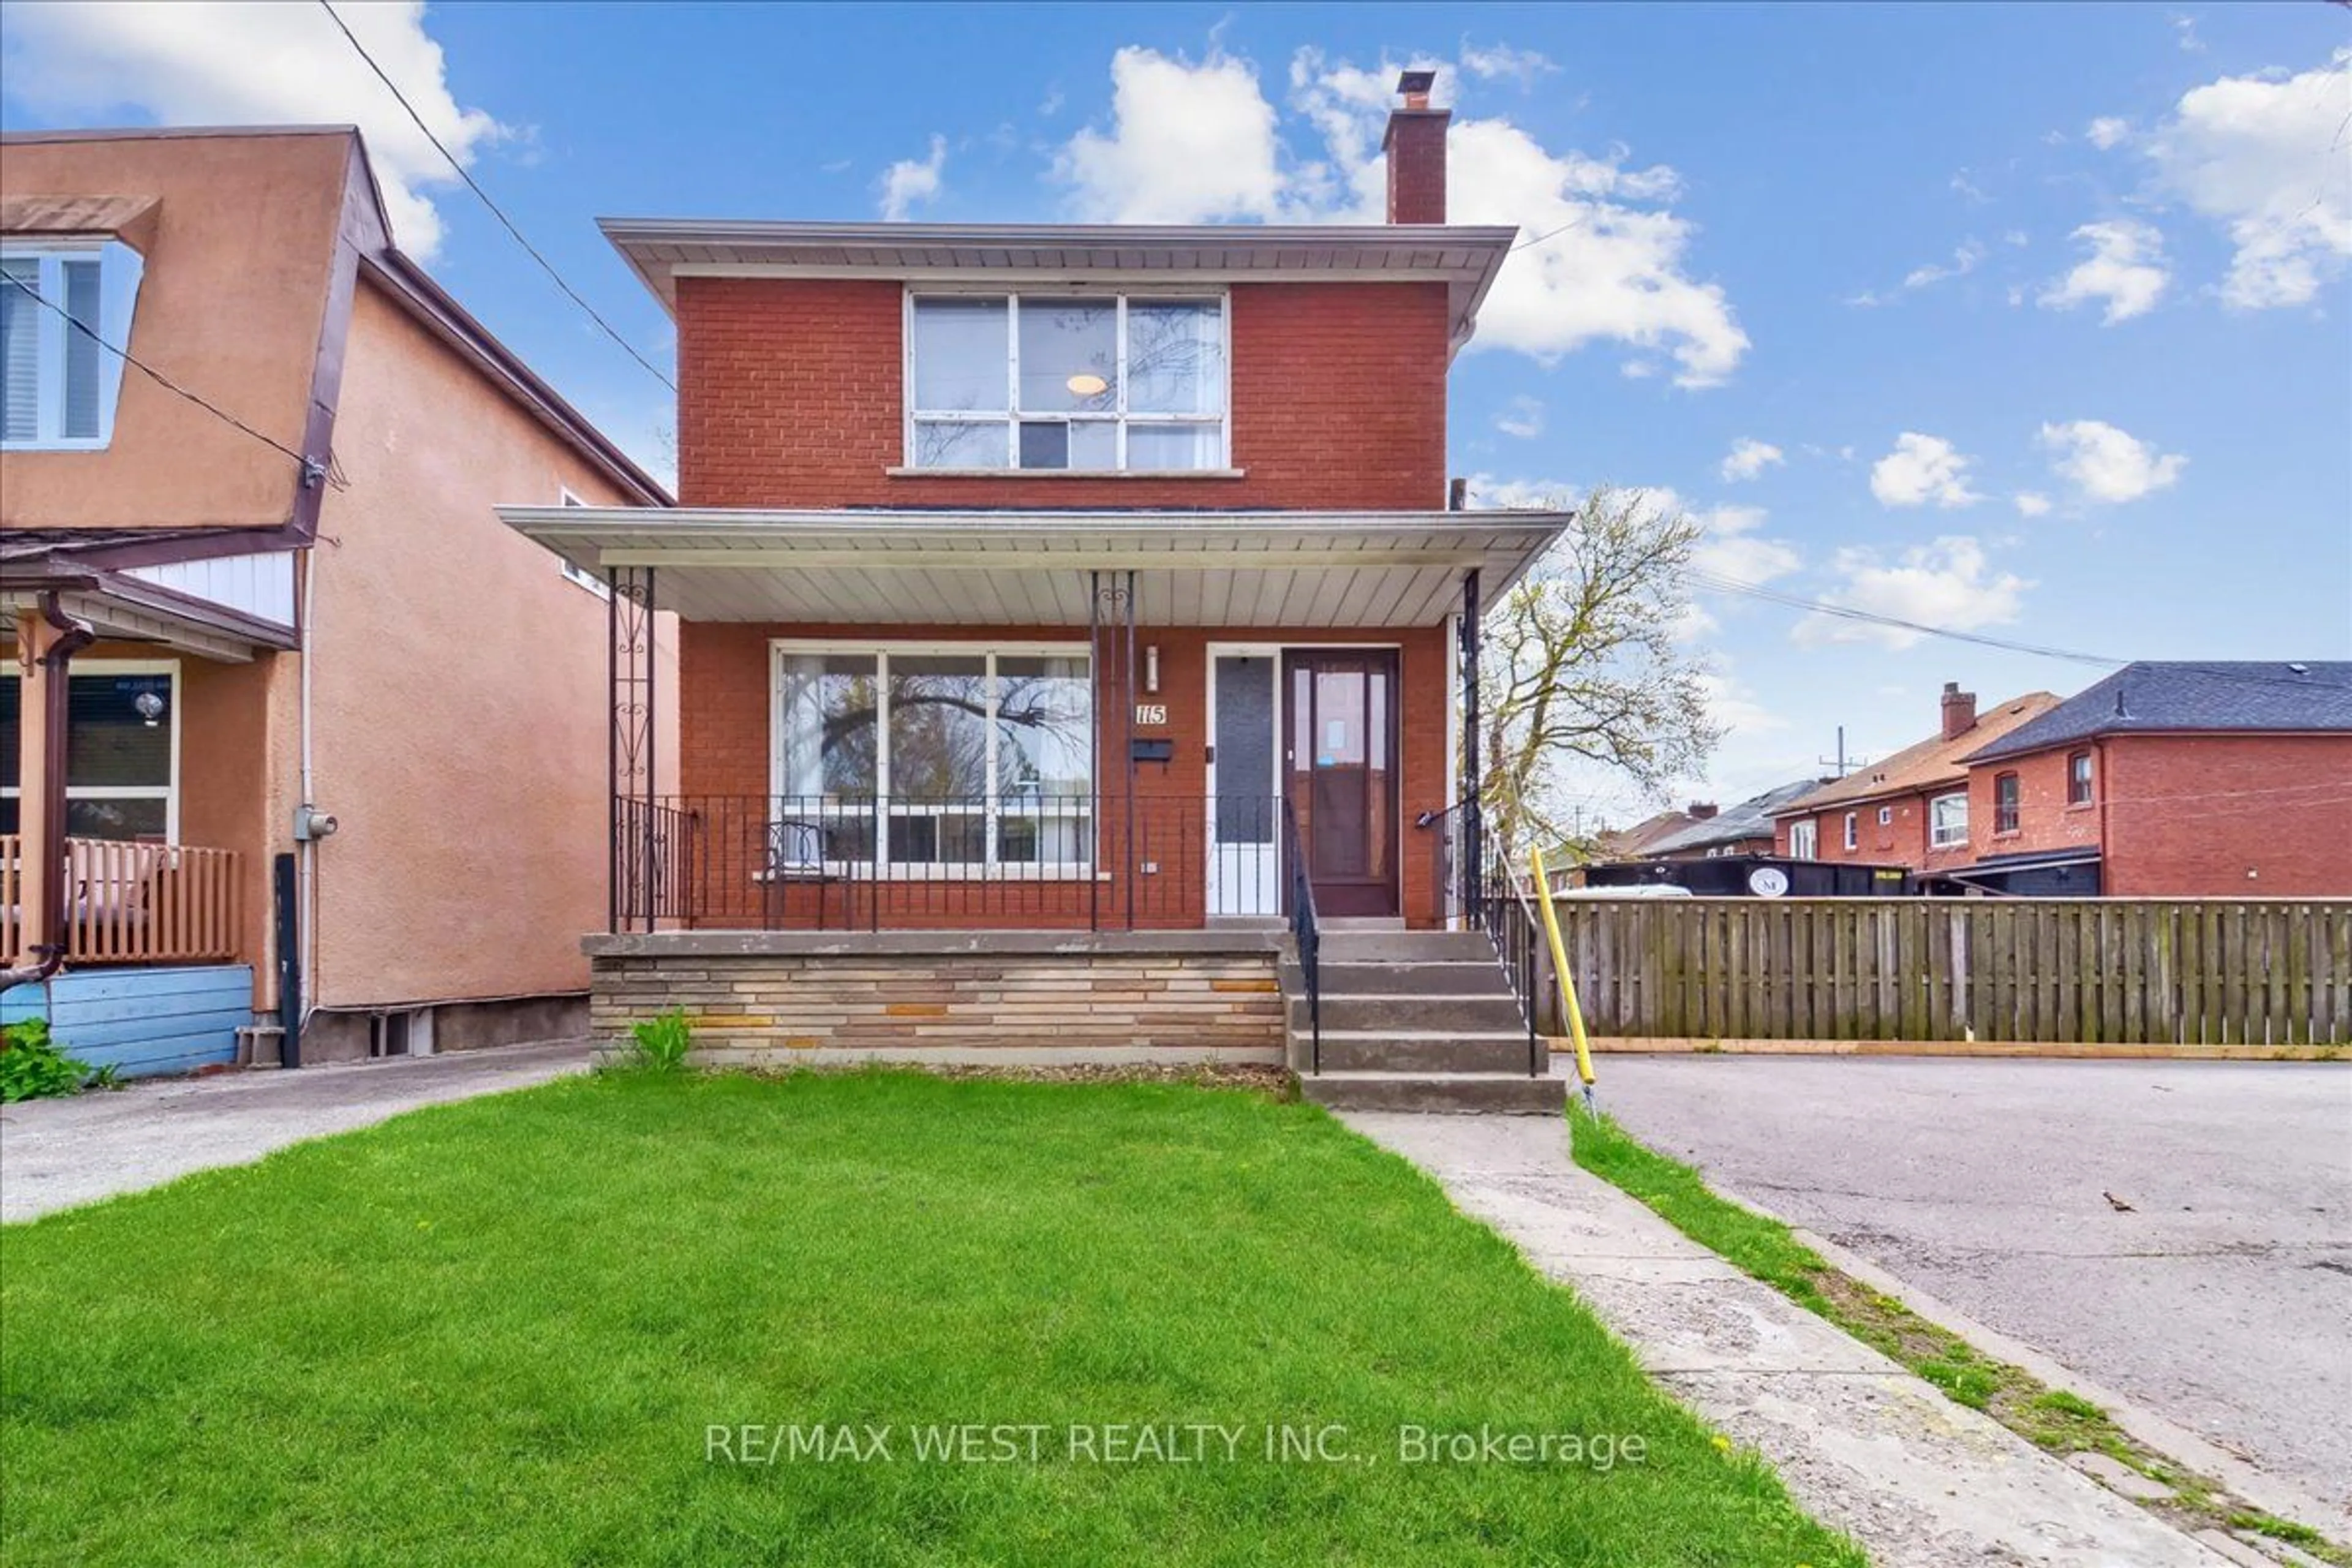 Frontside or backside of a home for 115 Torrens Ave, Toronto Ontario M4J 2P6